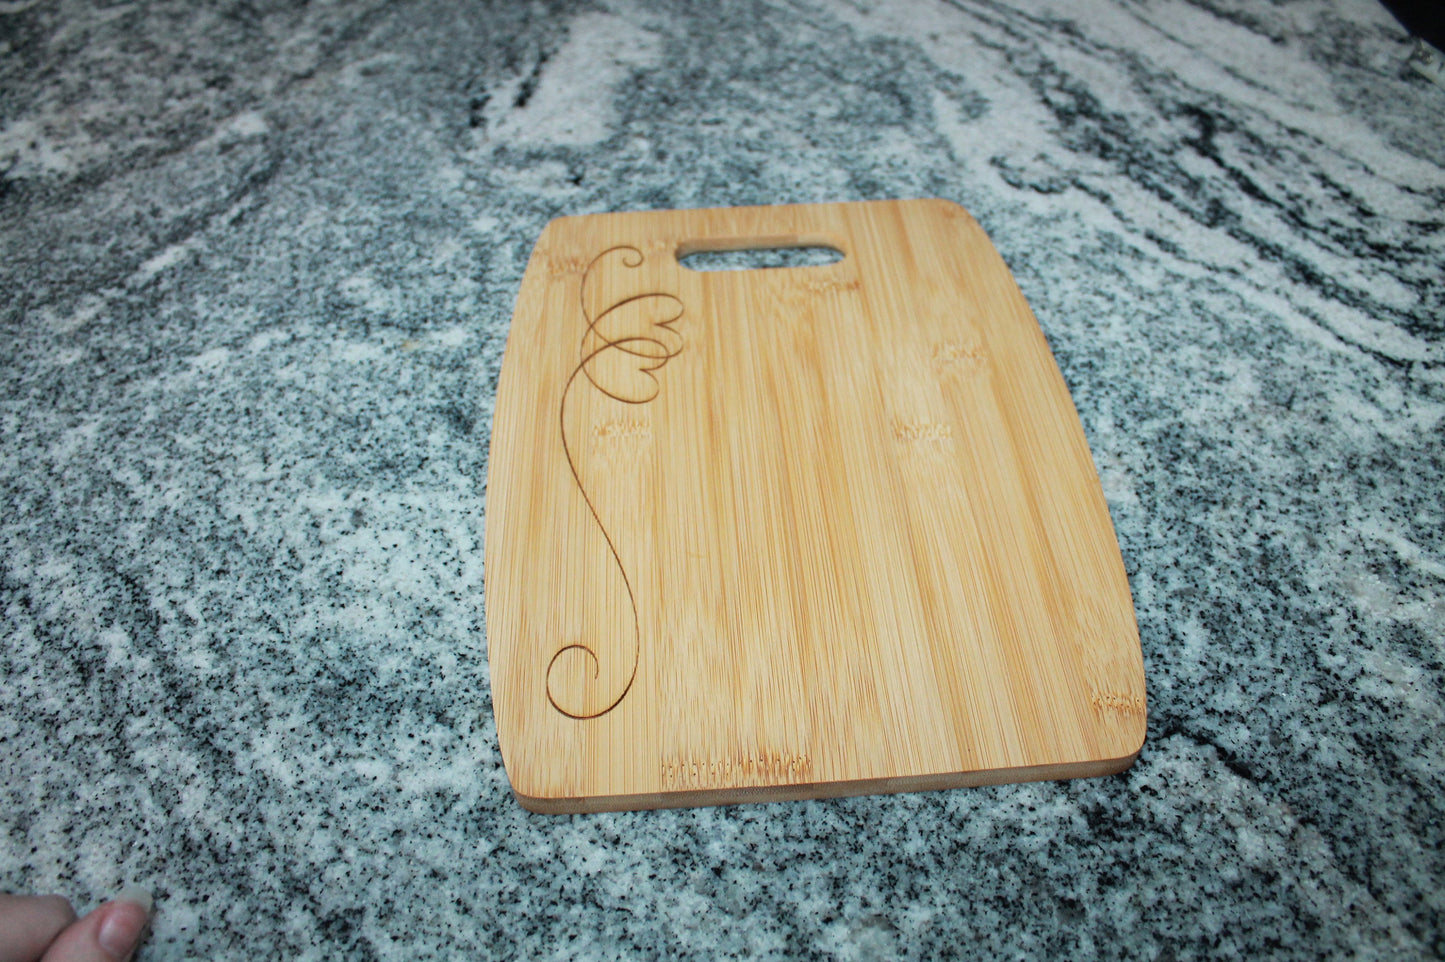 Wooden Engraved Cutting Board Two Hearts Engaged Wedding Gift New Home Pretty Curl Laser Engraved Heart Valentines Day Cook Hardwood